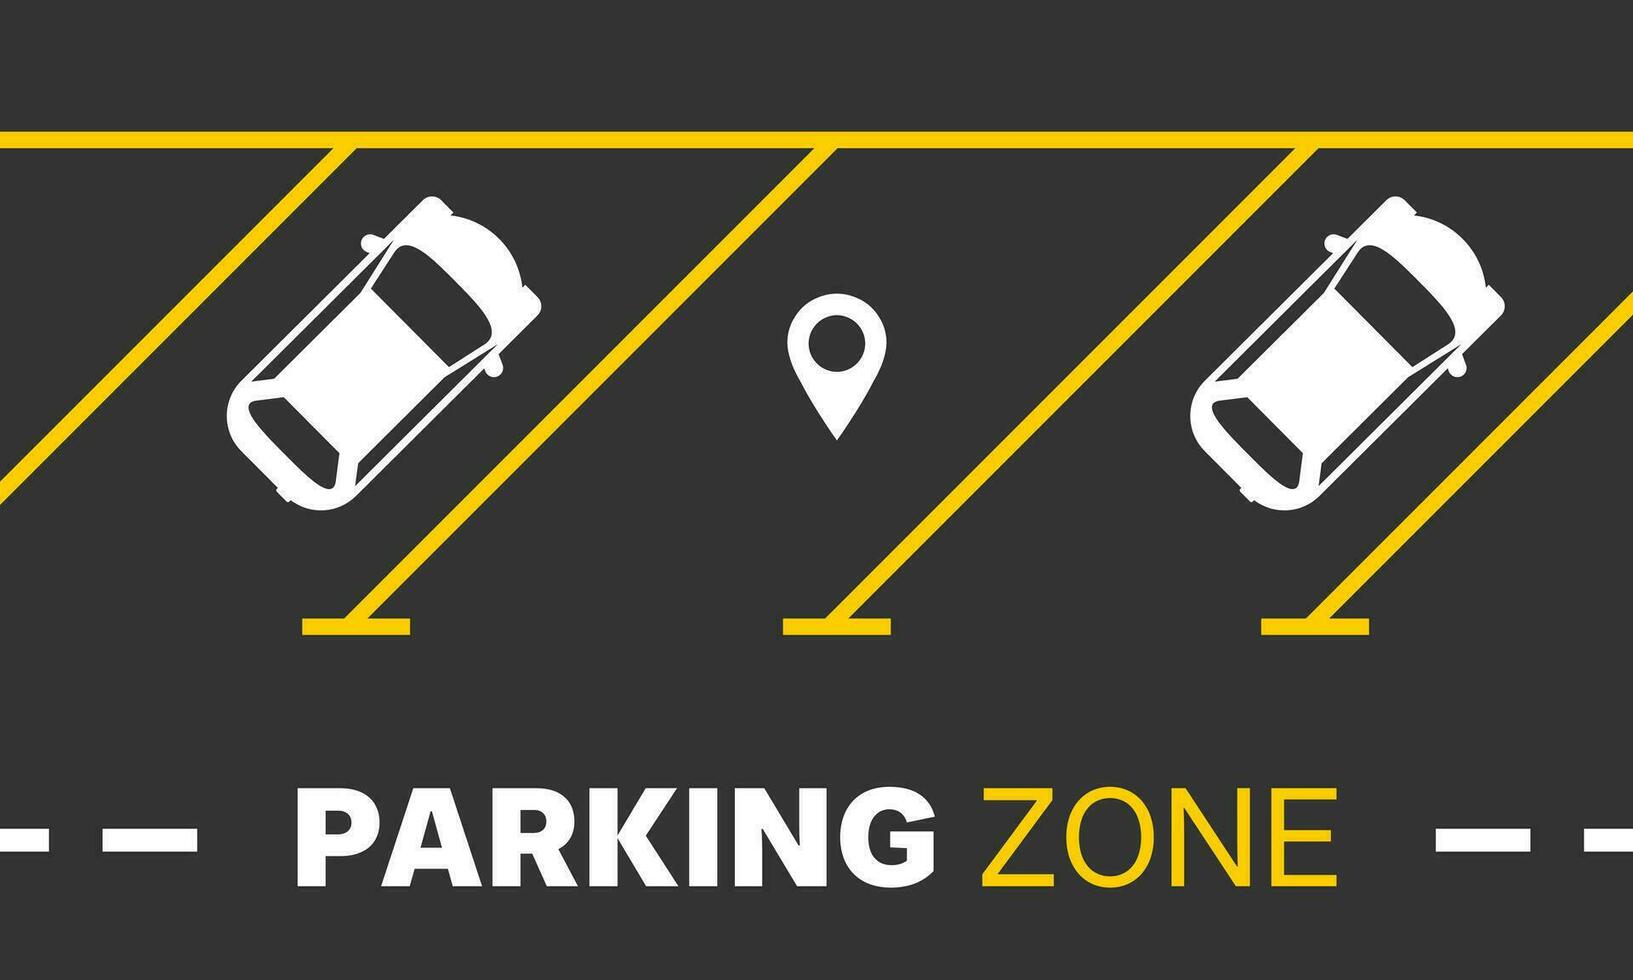 Illustration of a parking zone with car symbols, yellow parking lines, and location pins vector